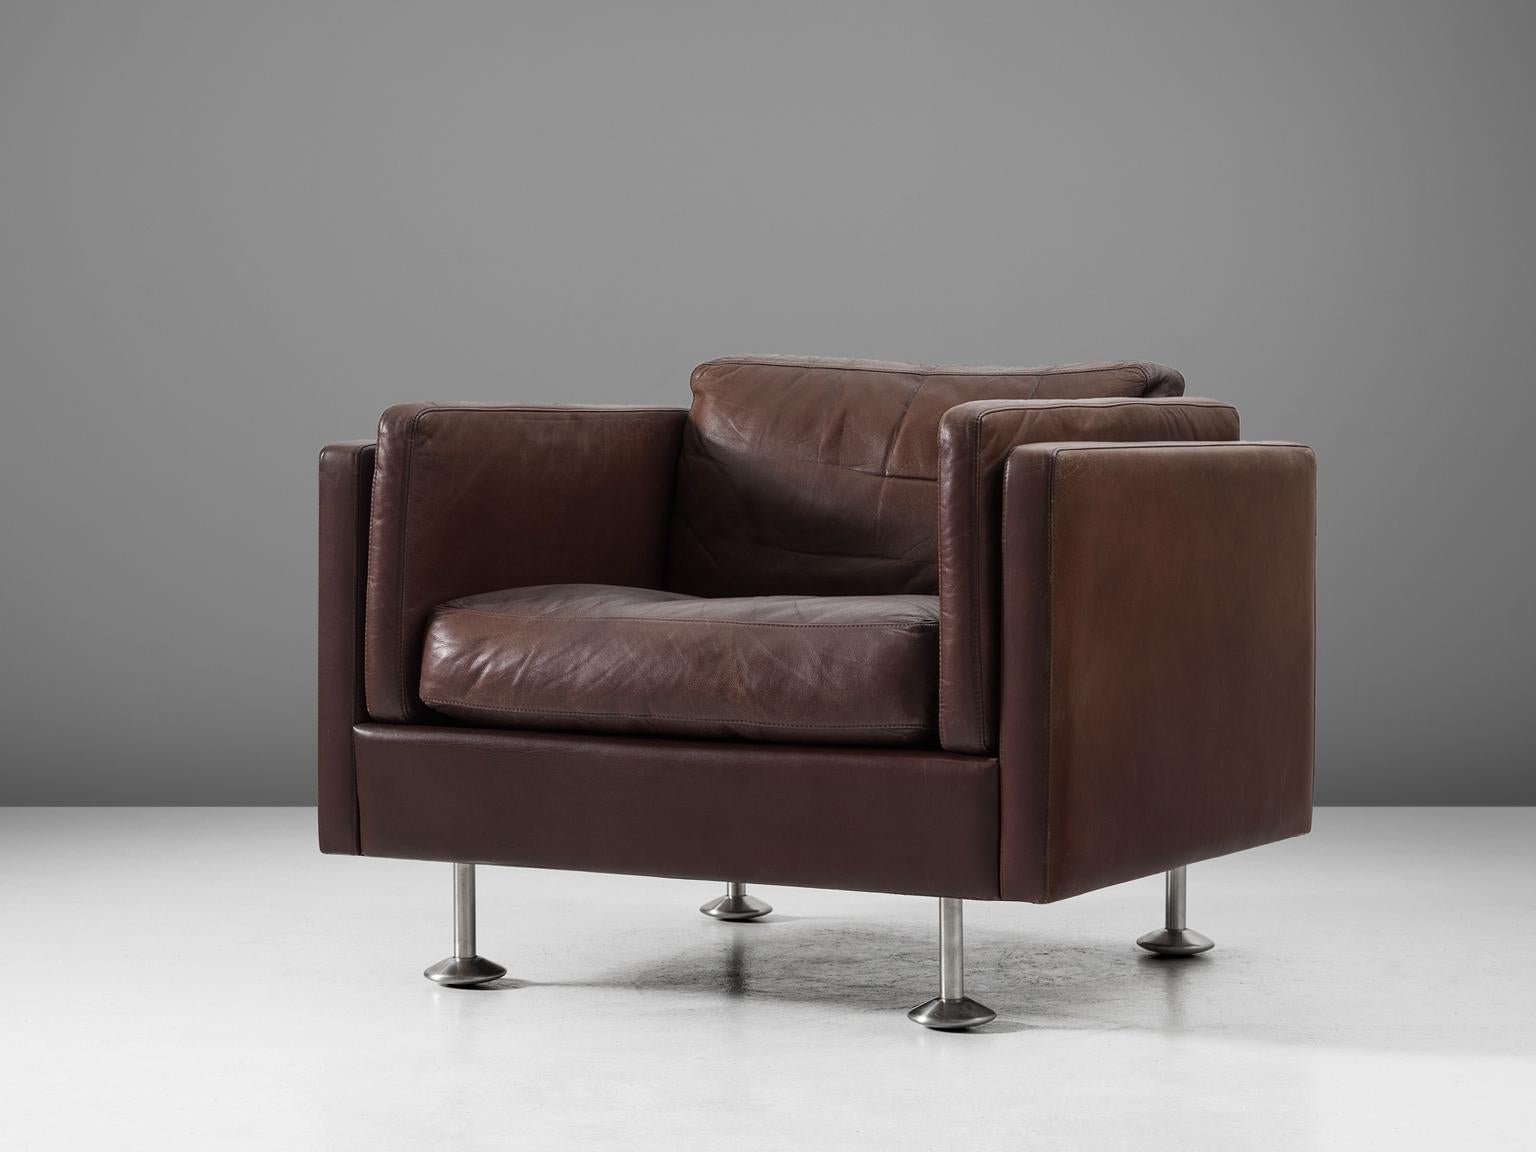 Illum Wikkelsoø, lounge chairs, in leather and stainless steel, Denmark, 1960s. 

Easy chair in dark brown leather, by Danish designer Illum Wikkelsø. This club chair has a cubic design. The tight and clean outside is complemented with a soft and